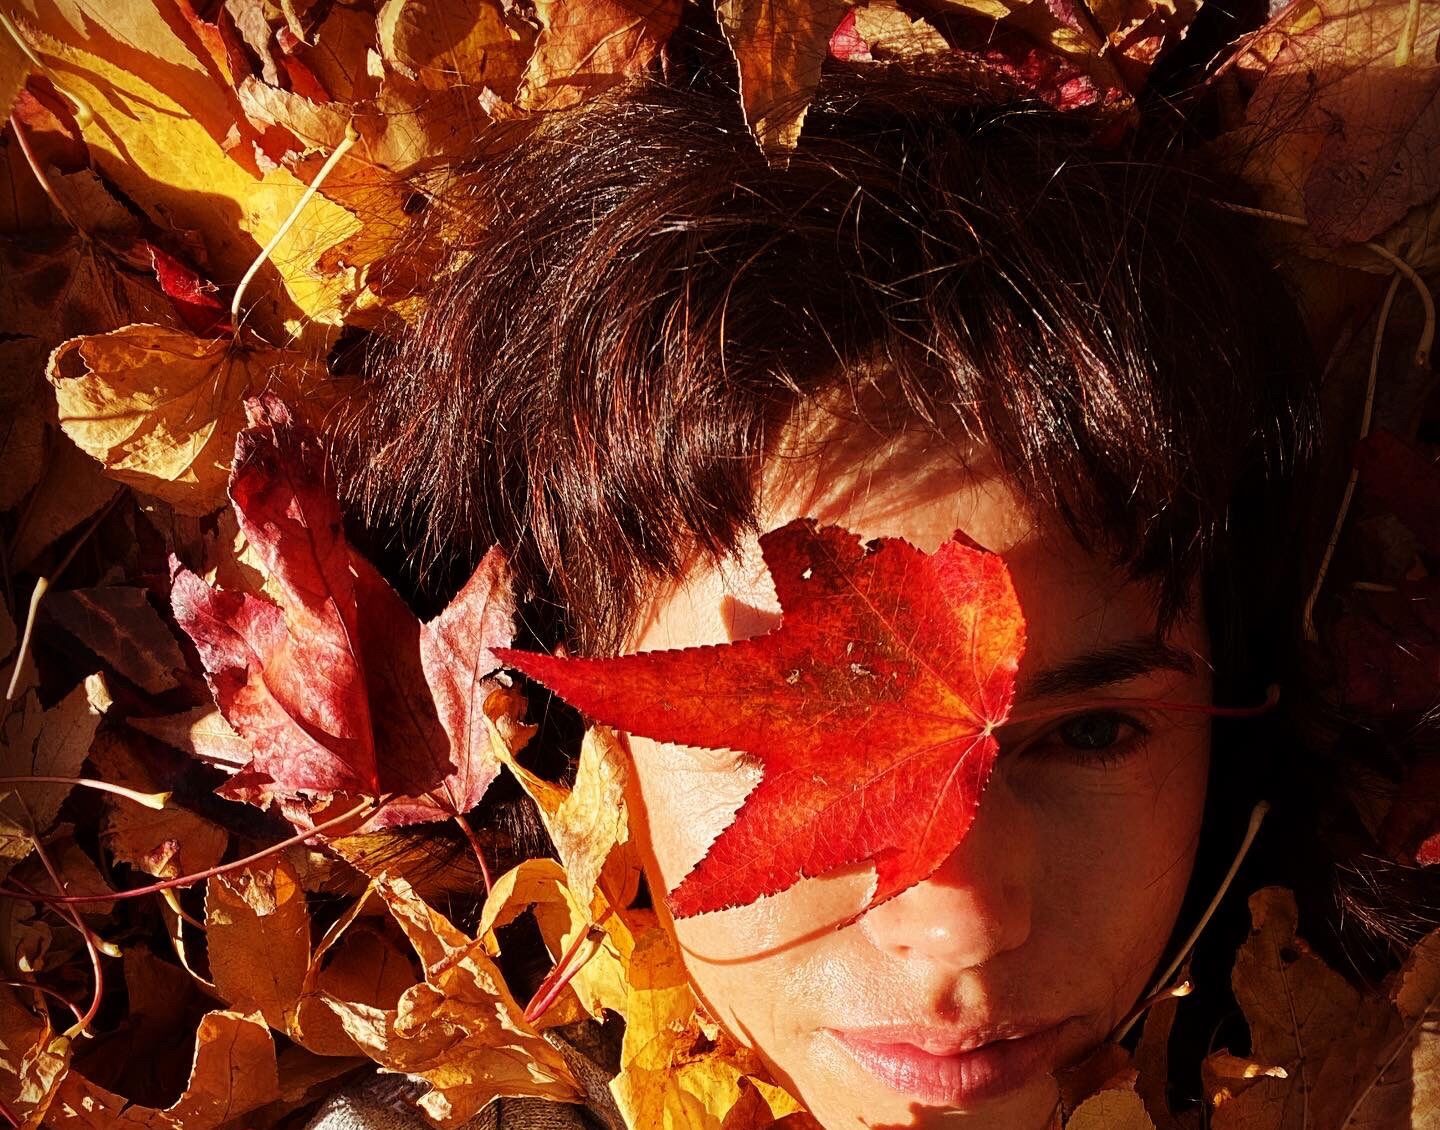 A woman with short brown hair lies in a pile of autumn leaves, one large read leaf partially obscuring her face